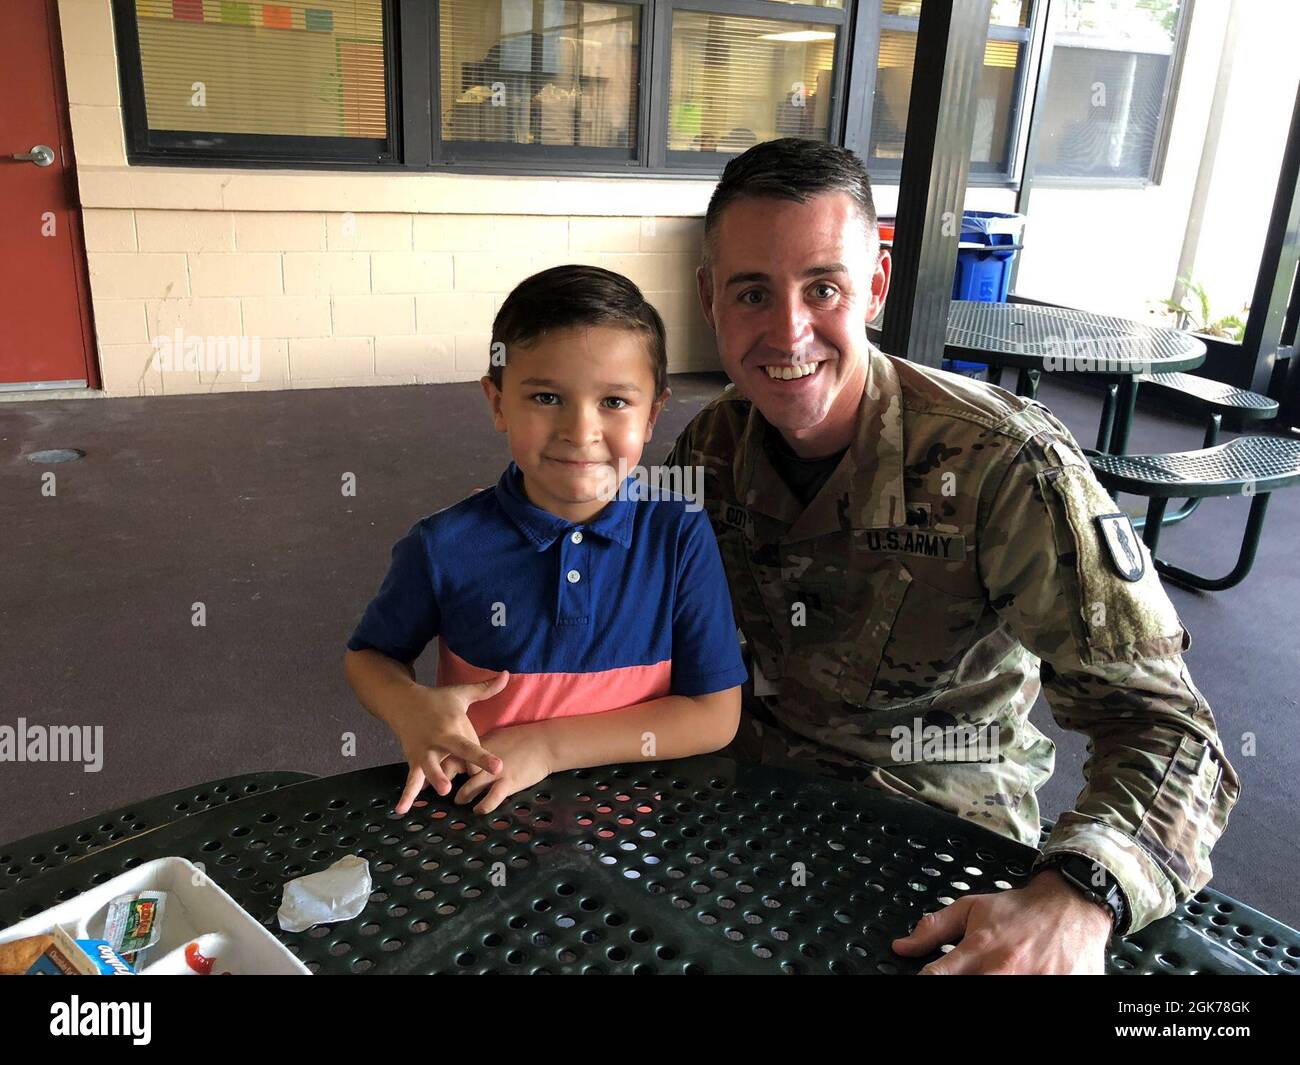 Army Capt. Michael Coy, the Drug Demand Reduction Outreach State Prevention Coordinator for Florida National Guard’s Counterdrug Program joins his Little for lunch at an elementary school in St. Johns County, Florida. Through the Big Brothers Big Sisters program, Coy has mentored this boy for the last two years. Stock Photo